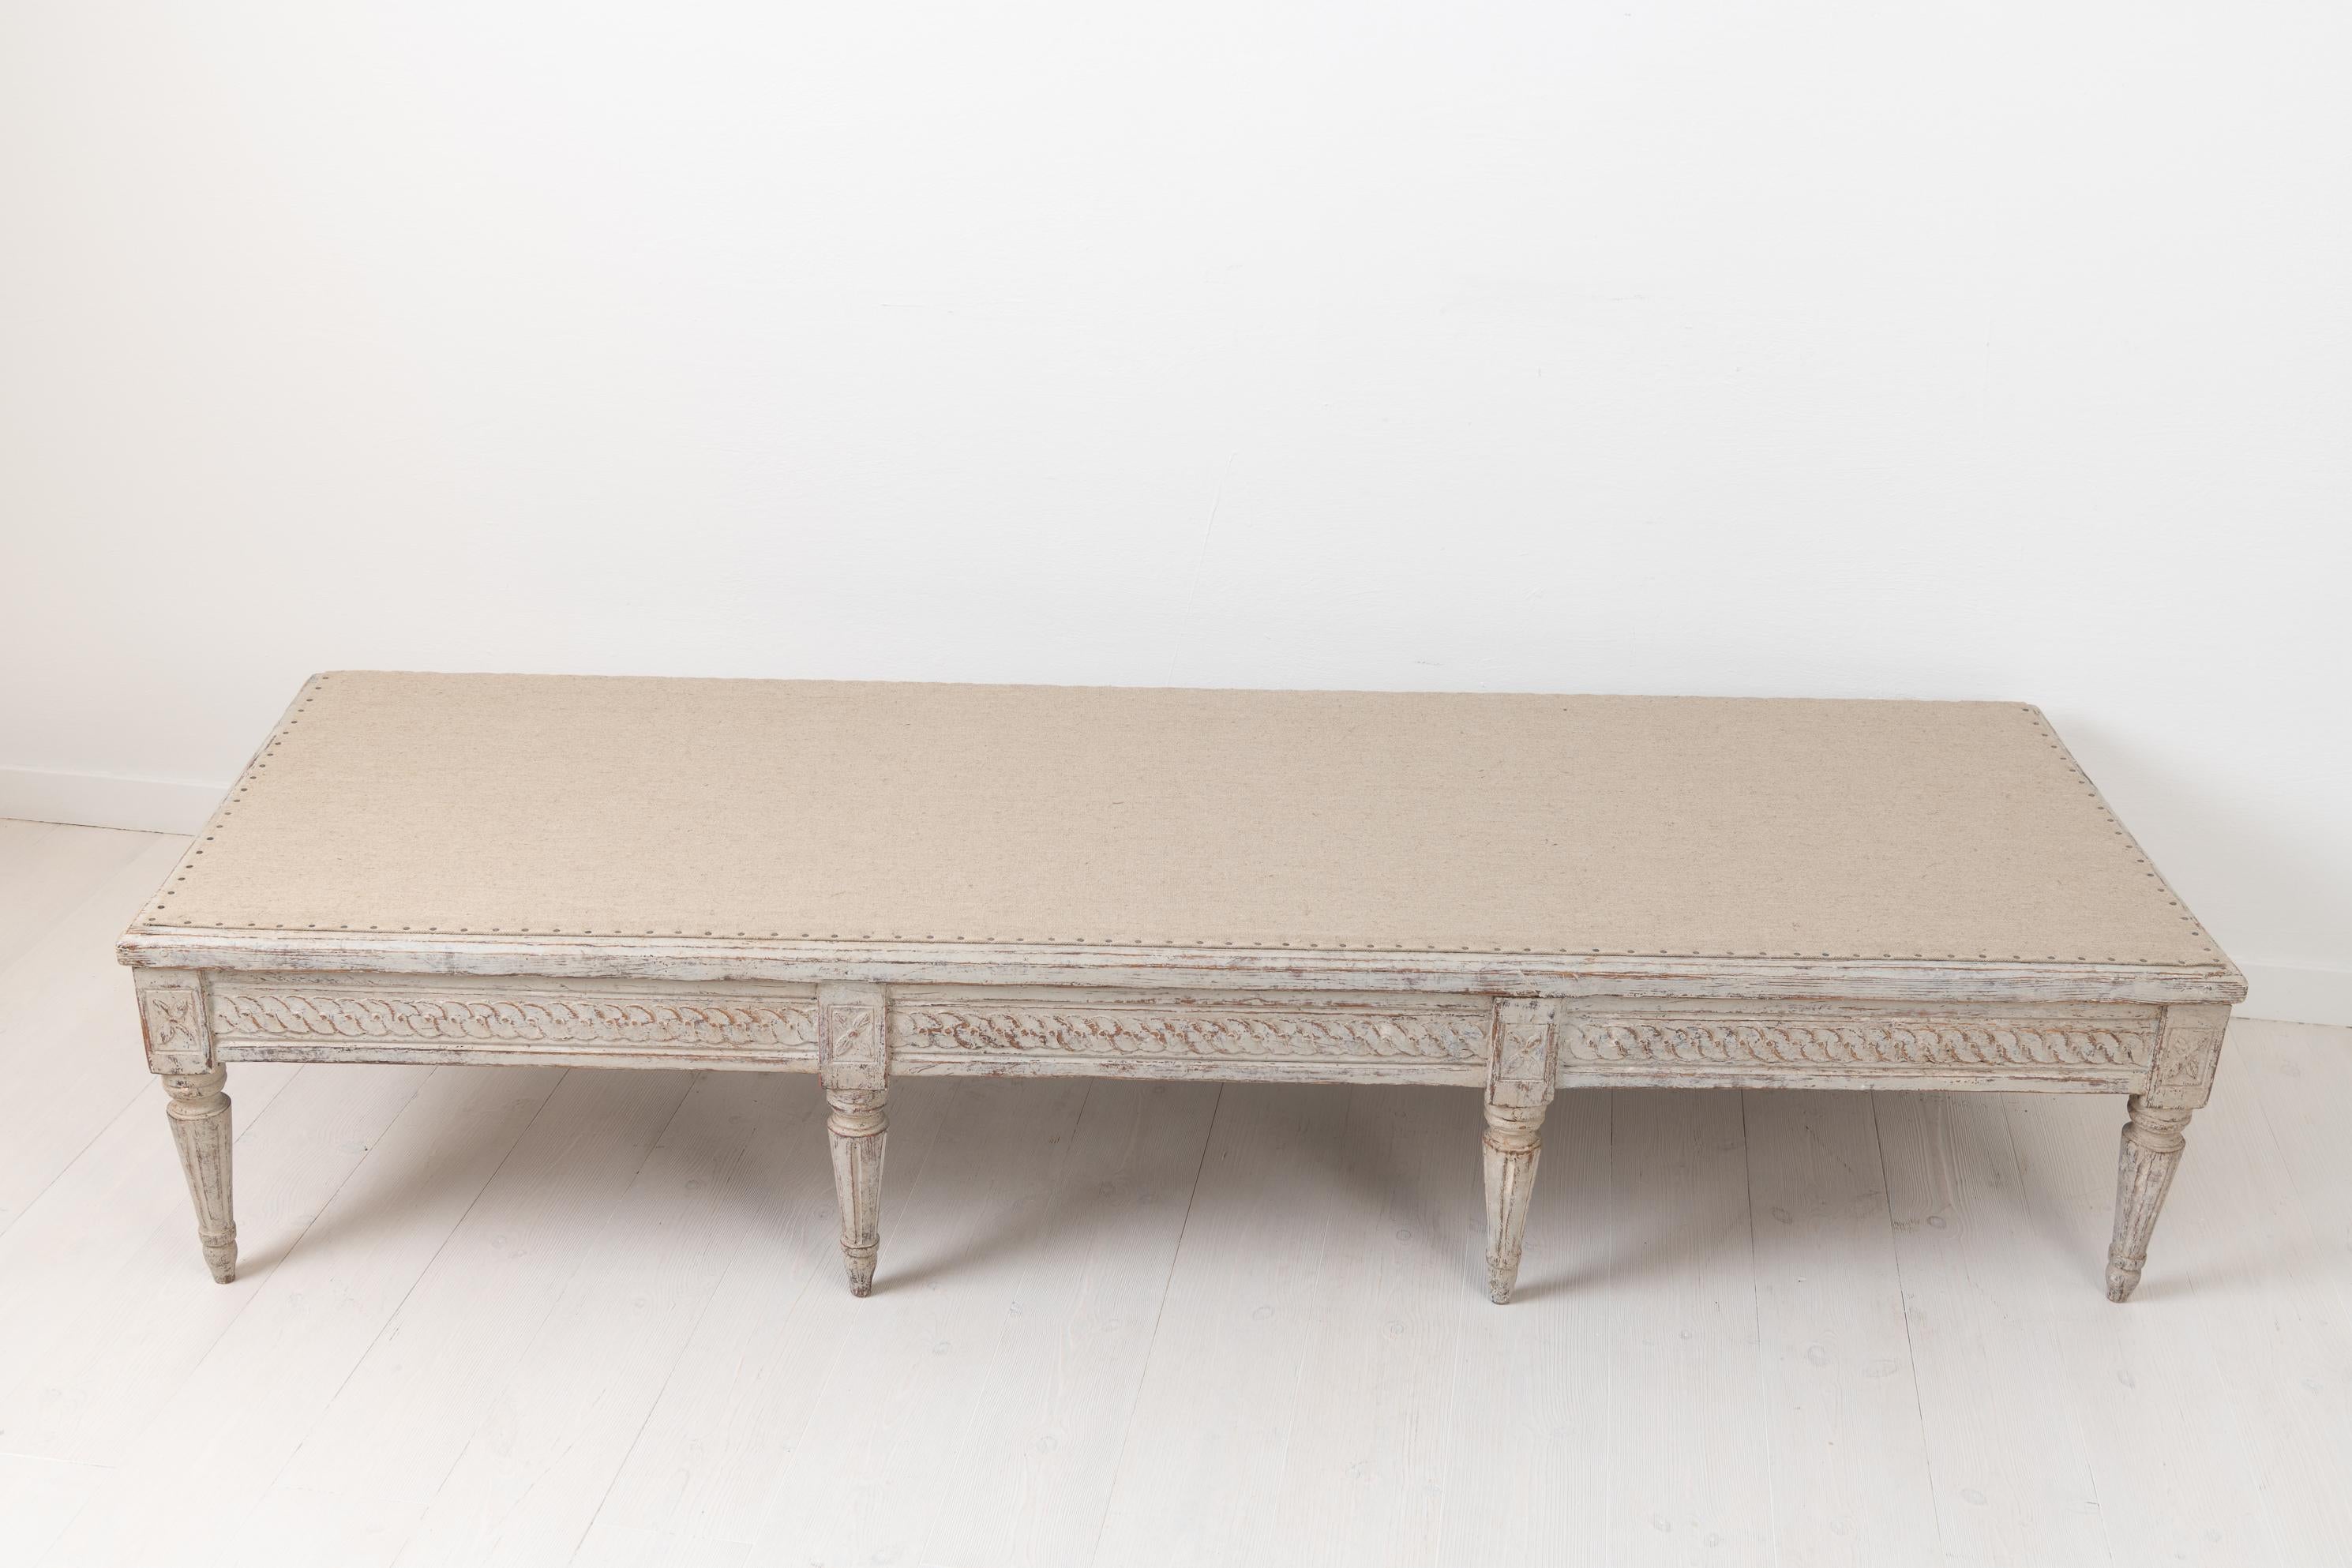 18th Century Low Antique Swedish Bench with White Distressed Paint